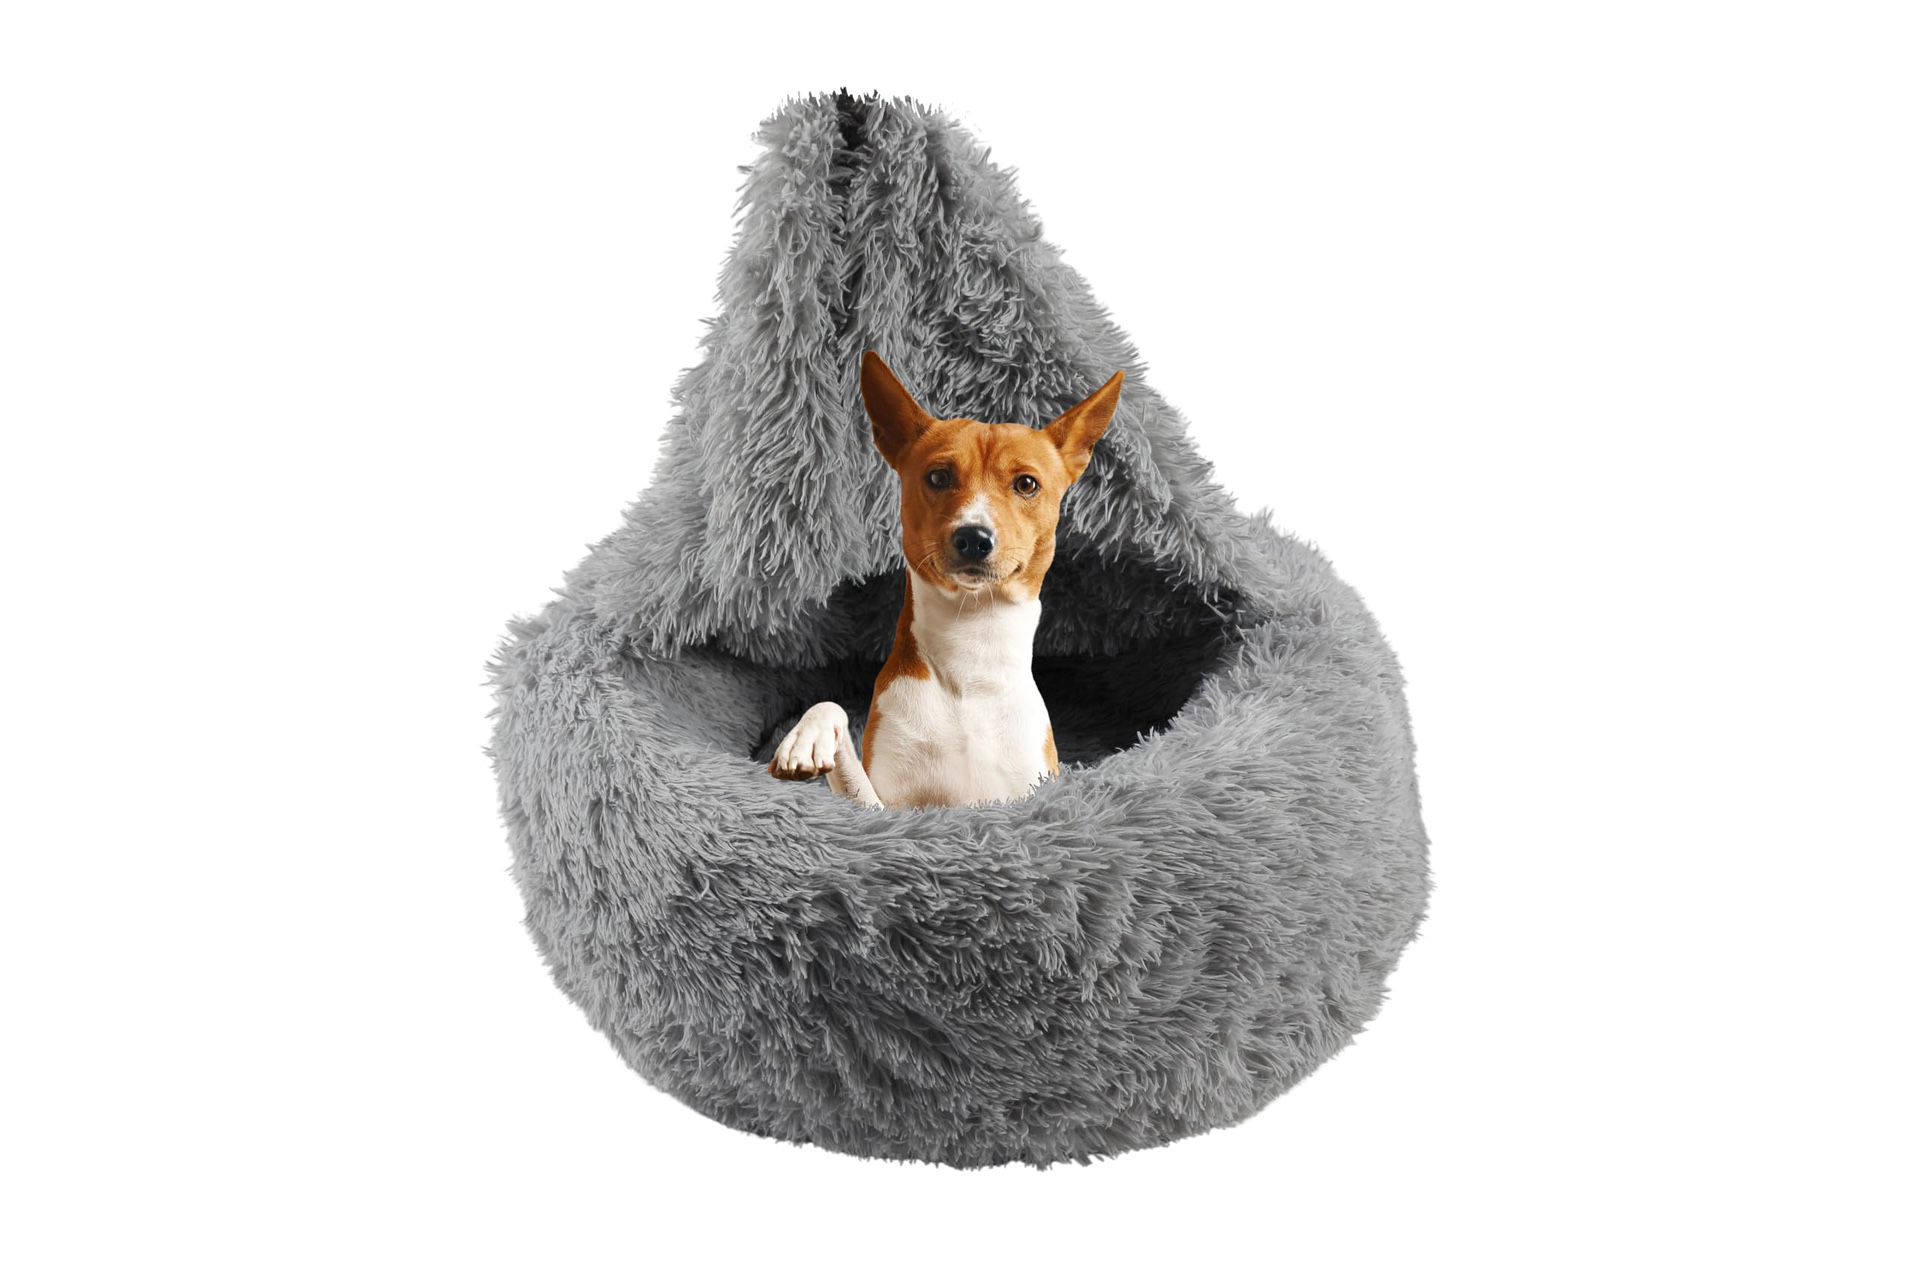 Dog Beds For Medium Dogs, Anti Anxiety Donut Dog Bed, Dog Bed With Blanket Attached, Washable Dog Bed, Calming Dog Bed With Cover (20"/26"/35")